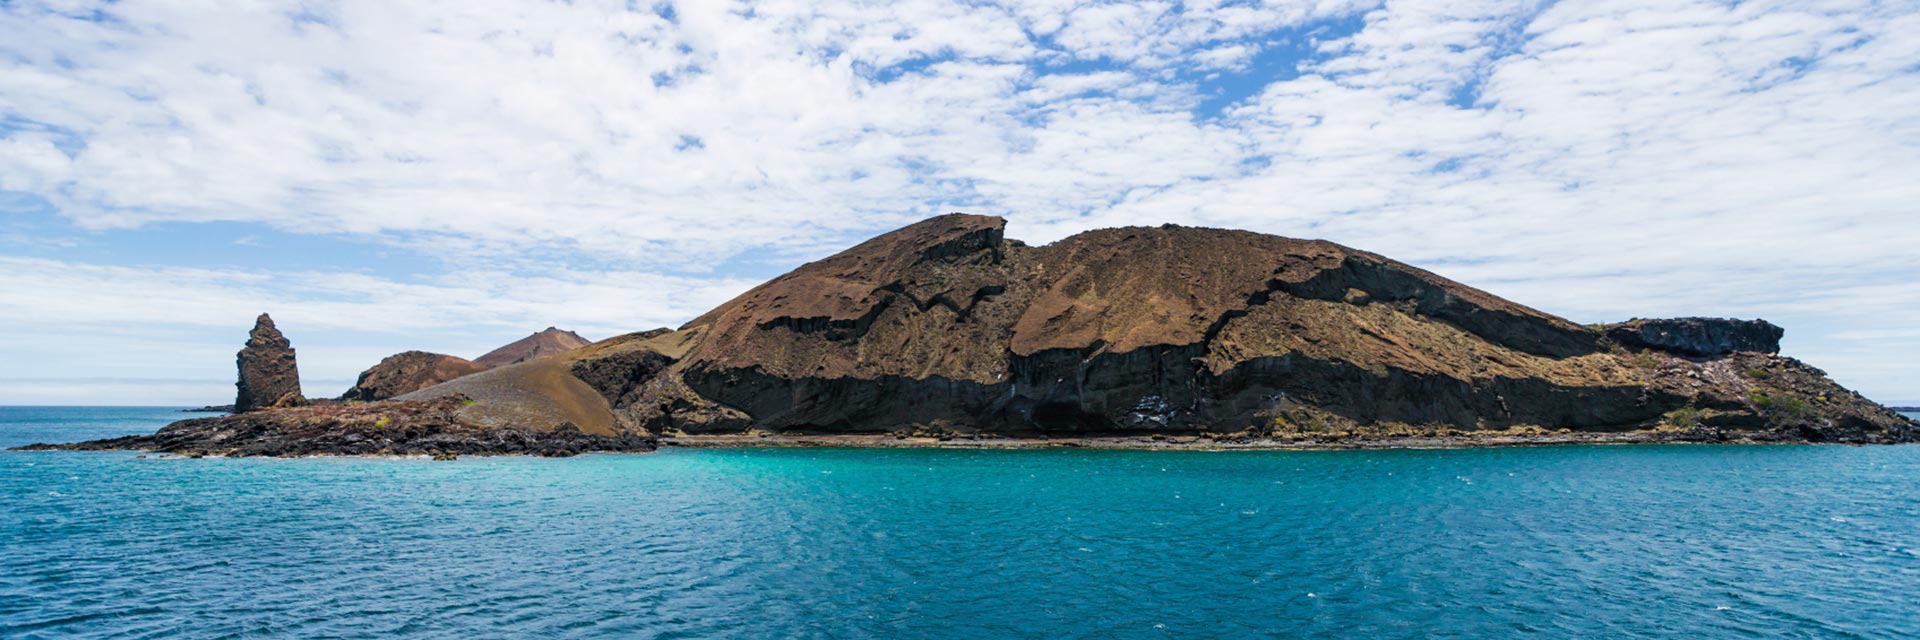 Learn Spanish on the Galapagos Islands - © Miralex